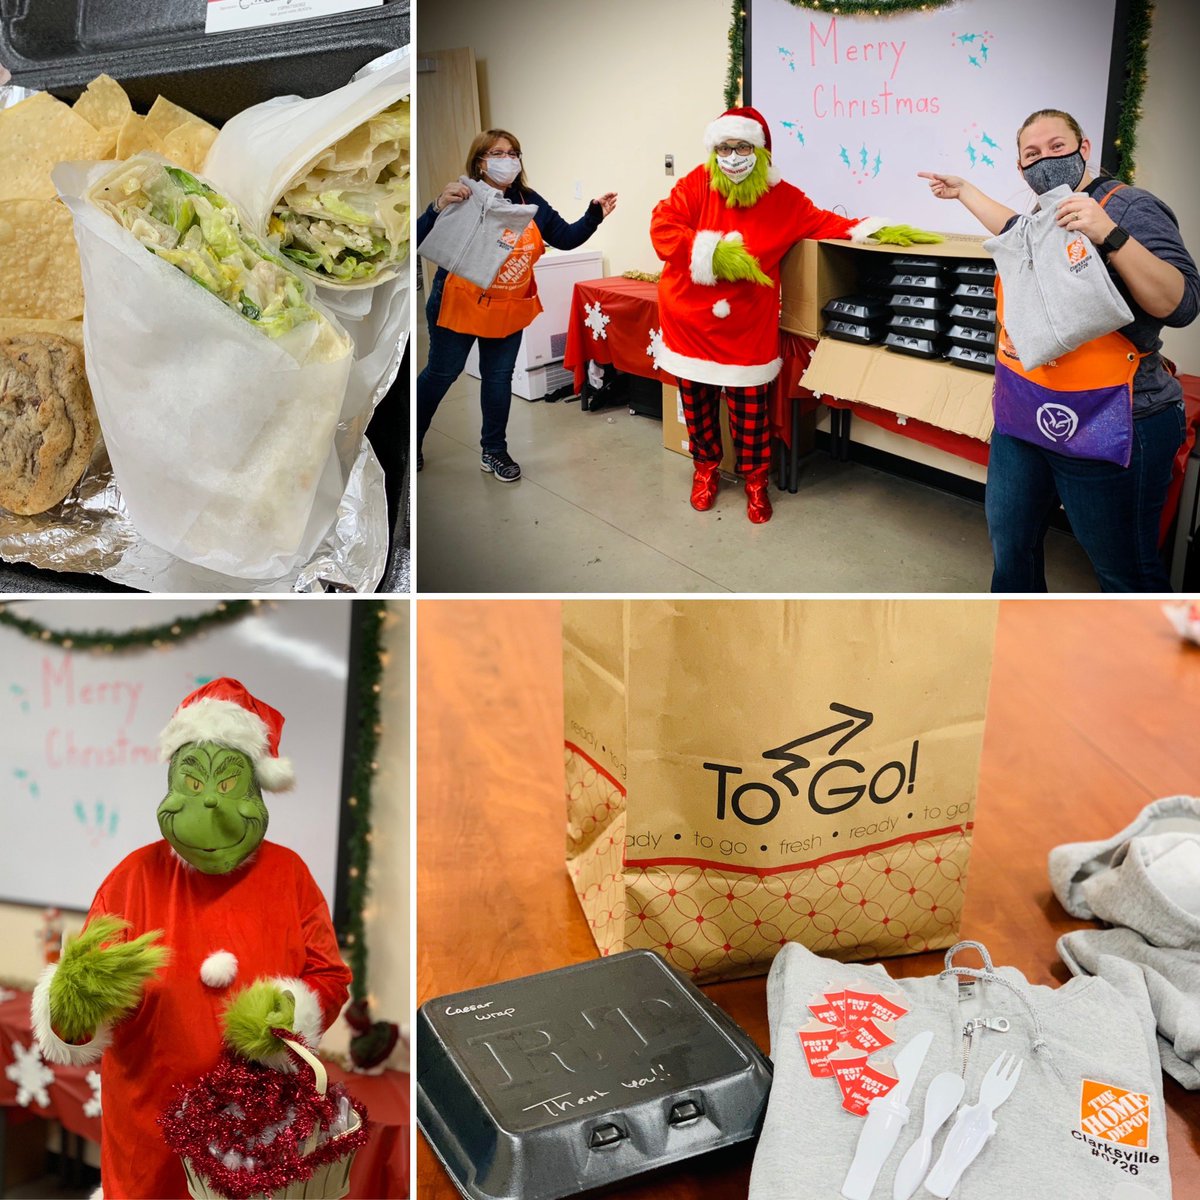 It’s a Merry Grinchmas! Or is it? Hey! That’s Brenda! 😳 She’s got gifts and Ruby Tuesday’s for lunch-All hand delivered with some grinch love! @kmn293 @ScottRoop @BrendaGrovesTHD @chrisdysonthd